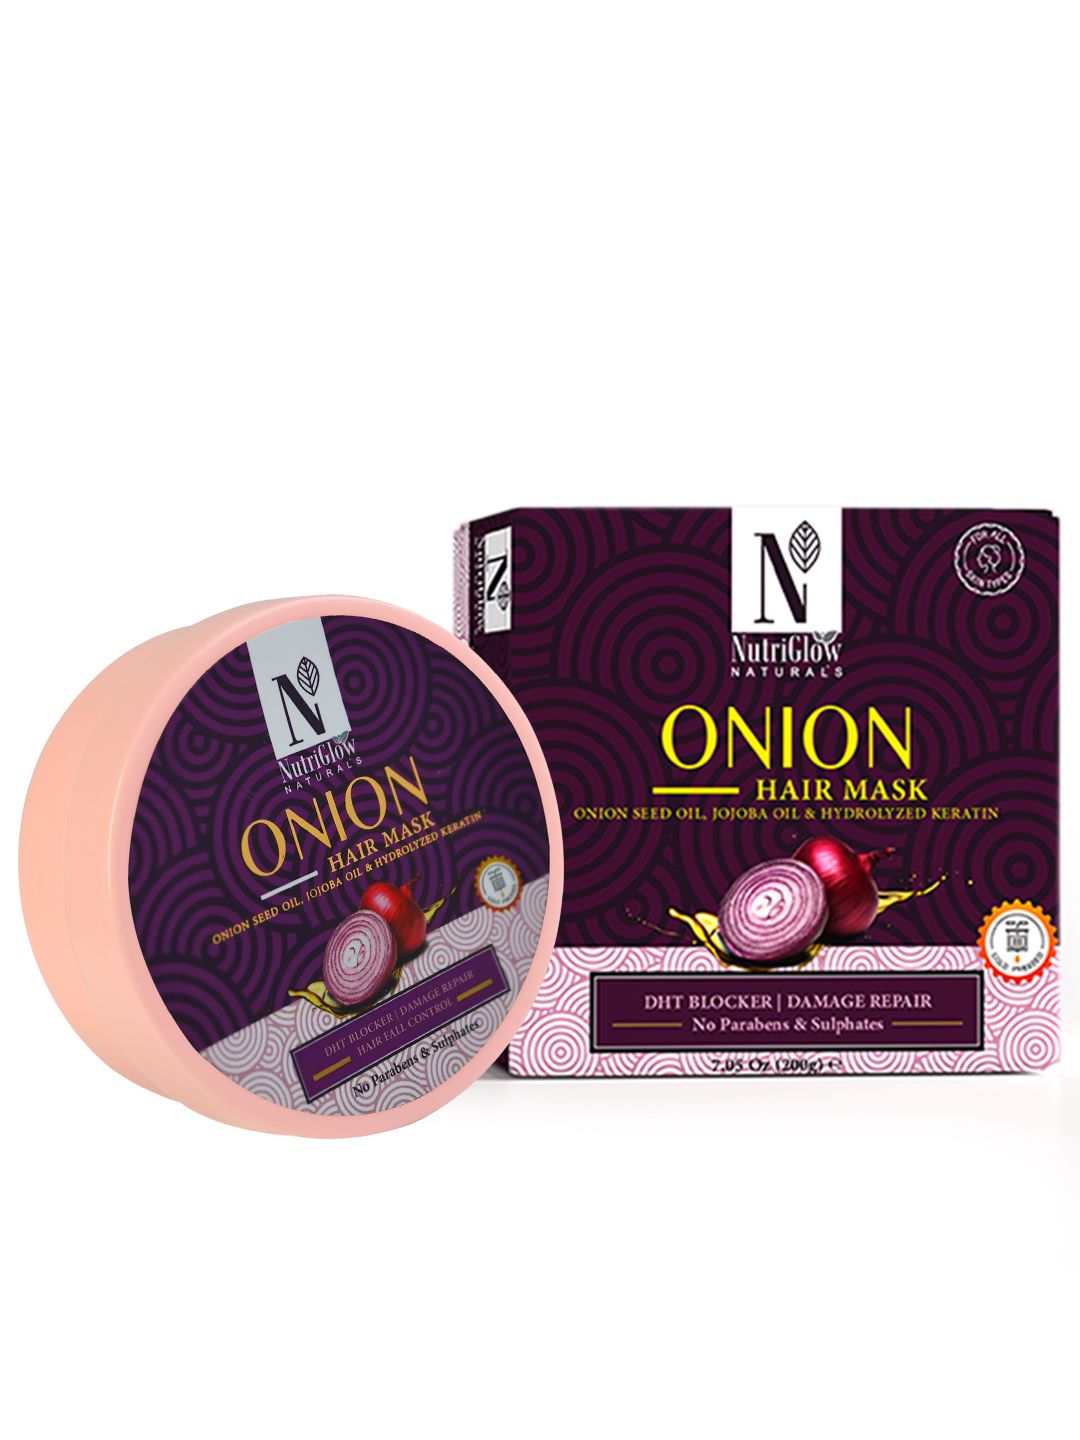 NutriGlow Onion Hair Masks 200g Price in India